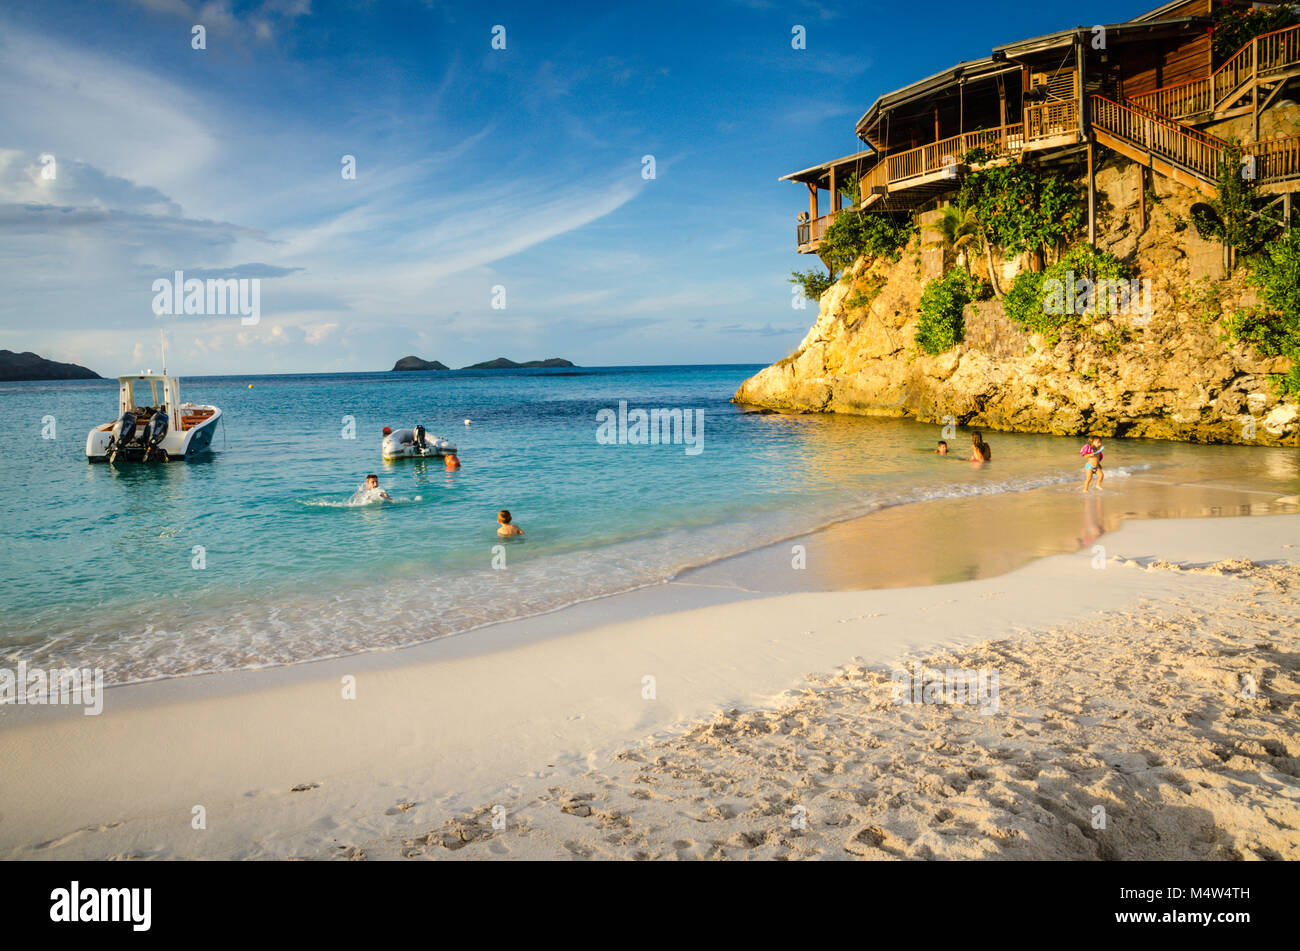 Family swimming and playing on shore at the beach next to Eden Rock Hotel in St. Barths. Stock Photo